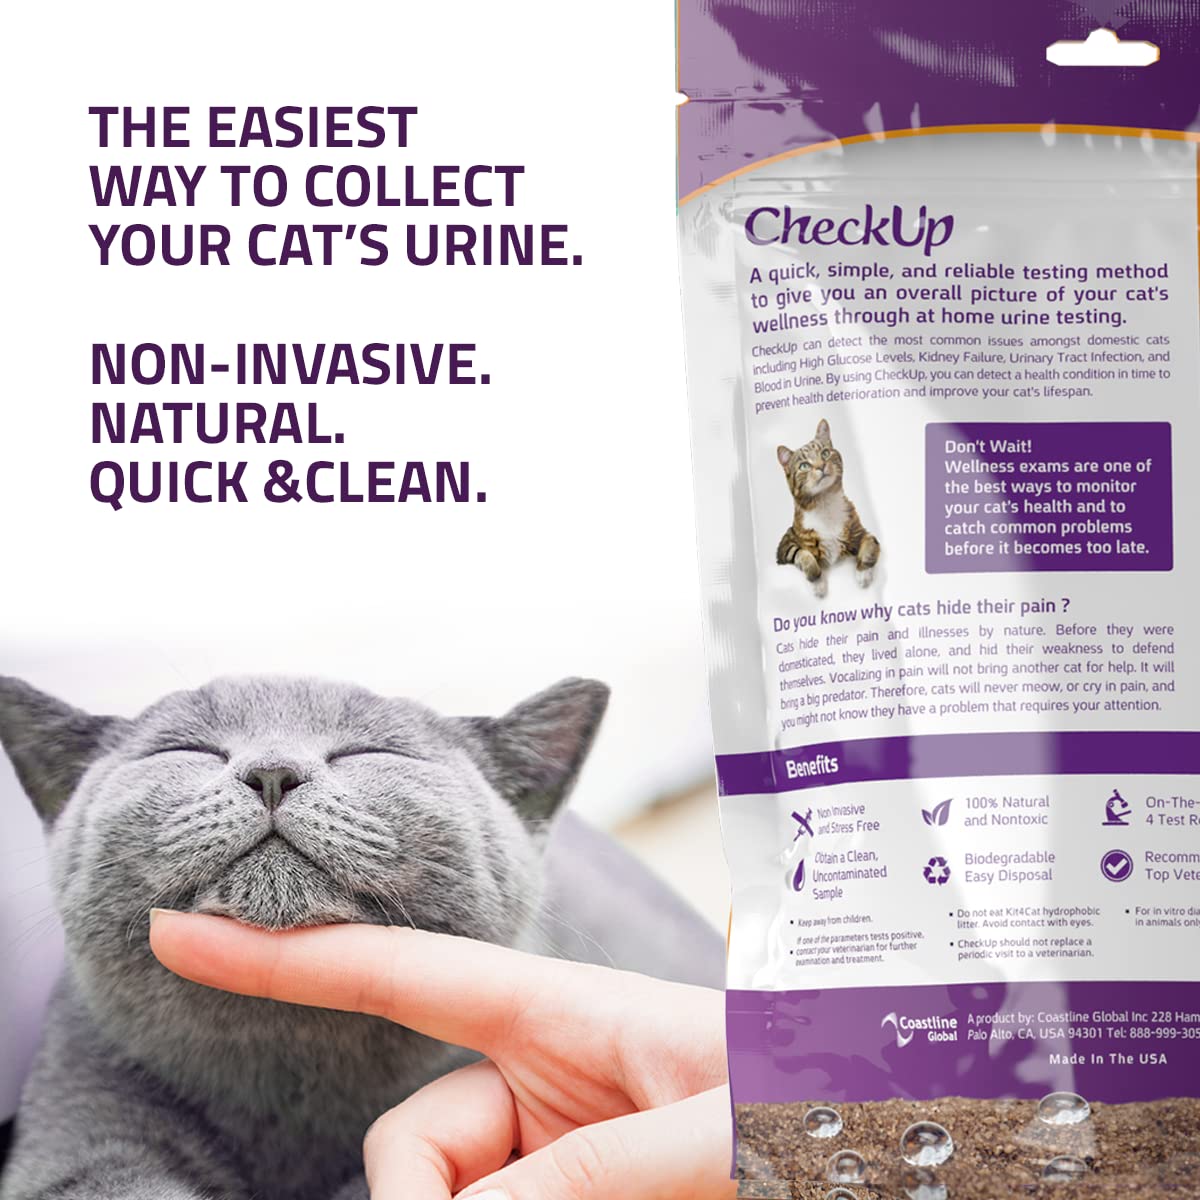 Cat Wellness Test Kit - Home Urine Collection